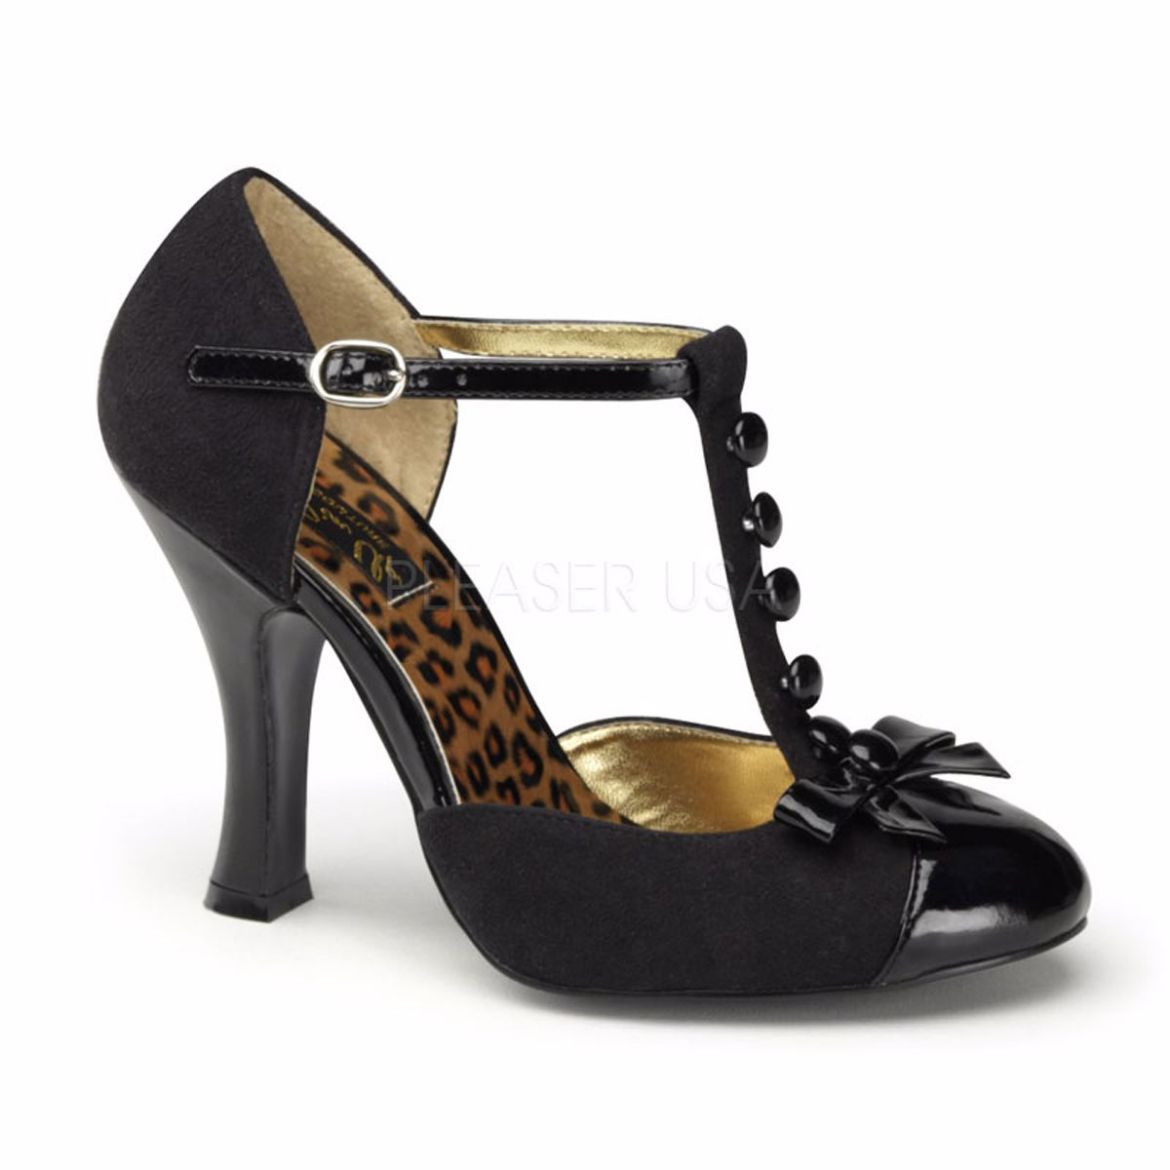 Product image of Pin Up Couture Smitten-10 Black M. Suede-Black Patent, 4 inch (10.2 cm) Heel Court Pump Shoes